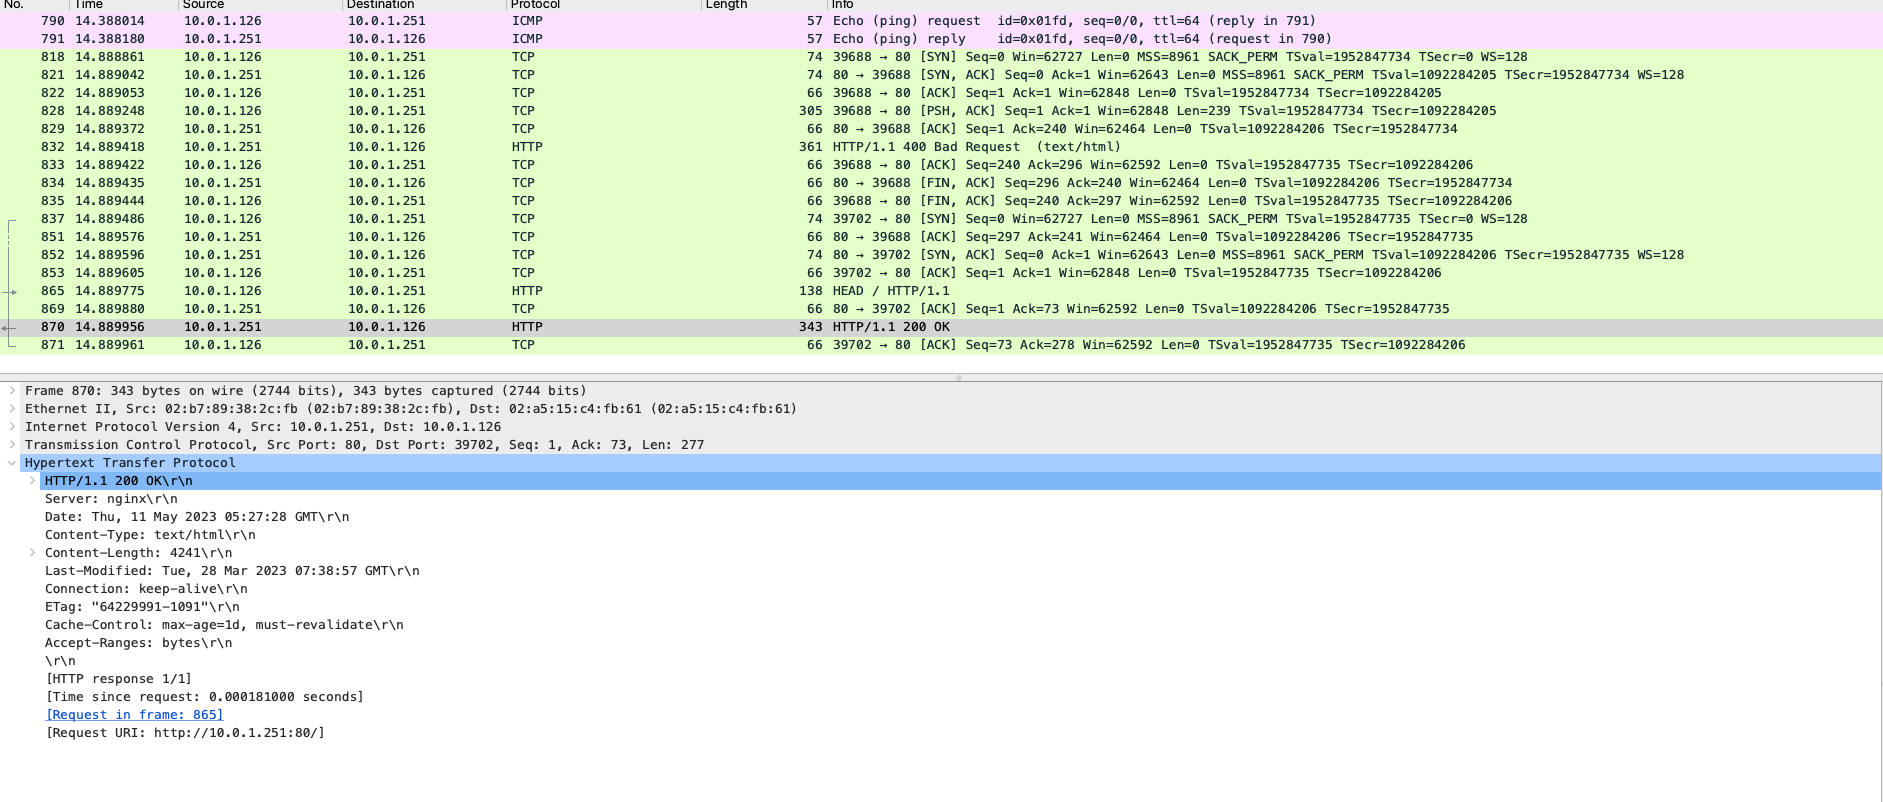 Wireshark capture of when ICMP is enabled